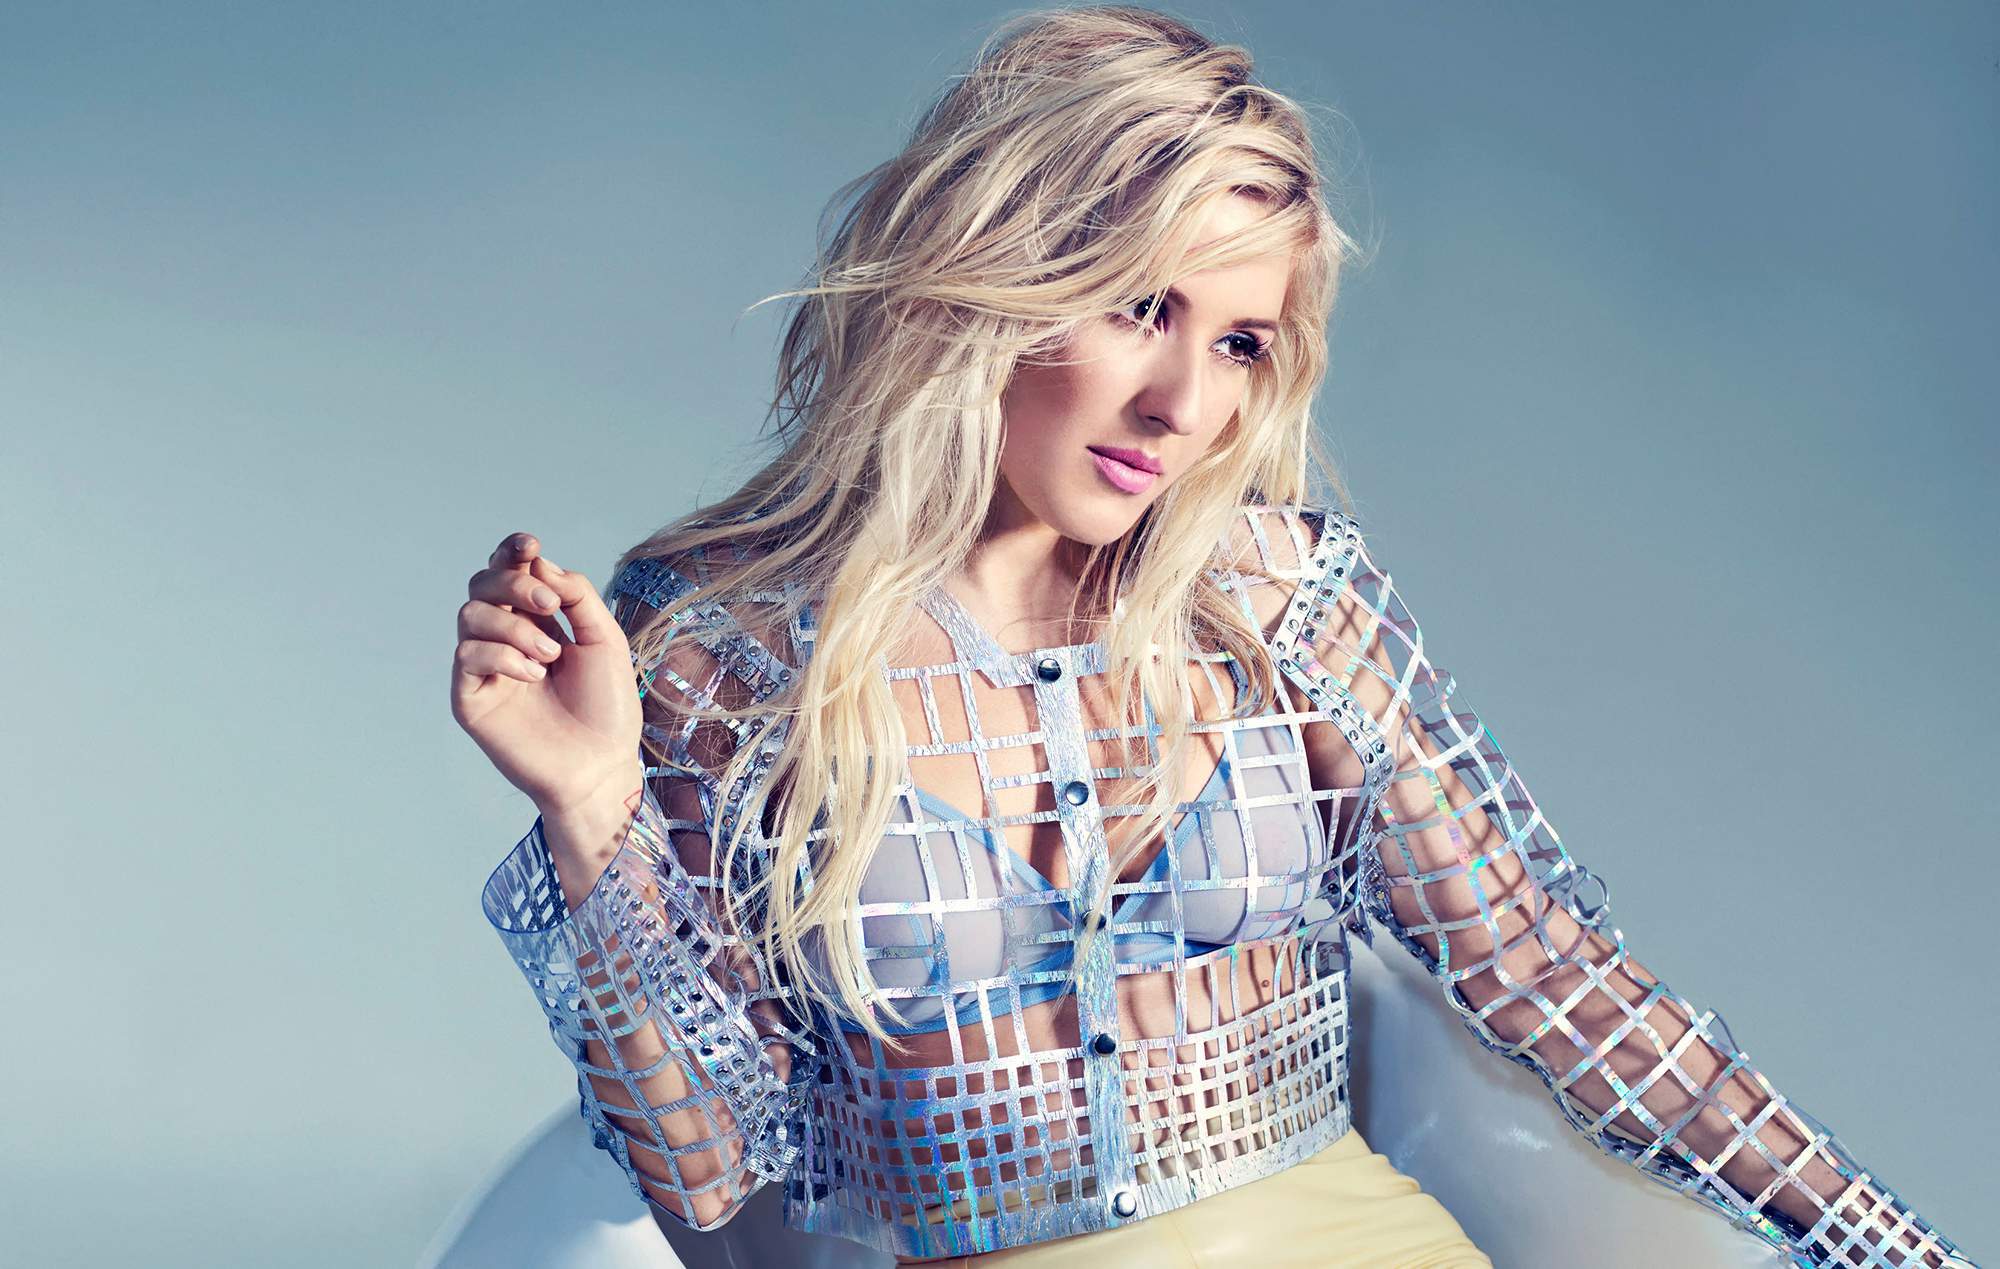 Ellie Goulding unveils a sizzling new 50 Shades of Grey song | Hollywood -  Hindustan Times